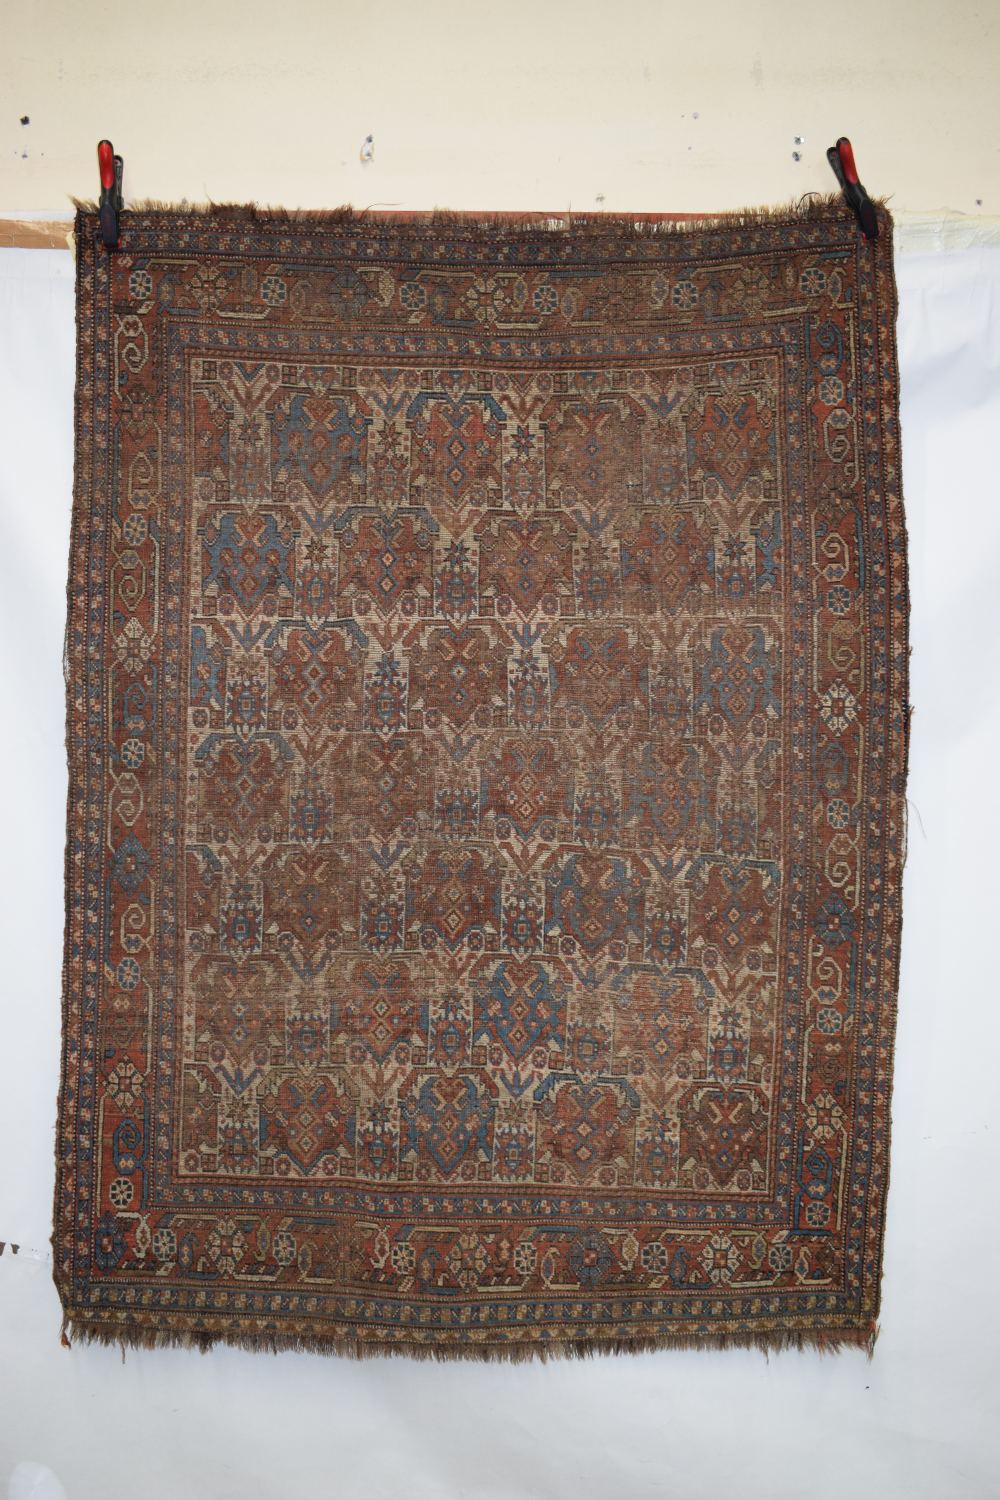 Afshar rug with ivory field, Kerman area, south east Persia, circa 1920s-30s, 6ft. 2in. x 4ft. - Image 2 of 8